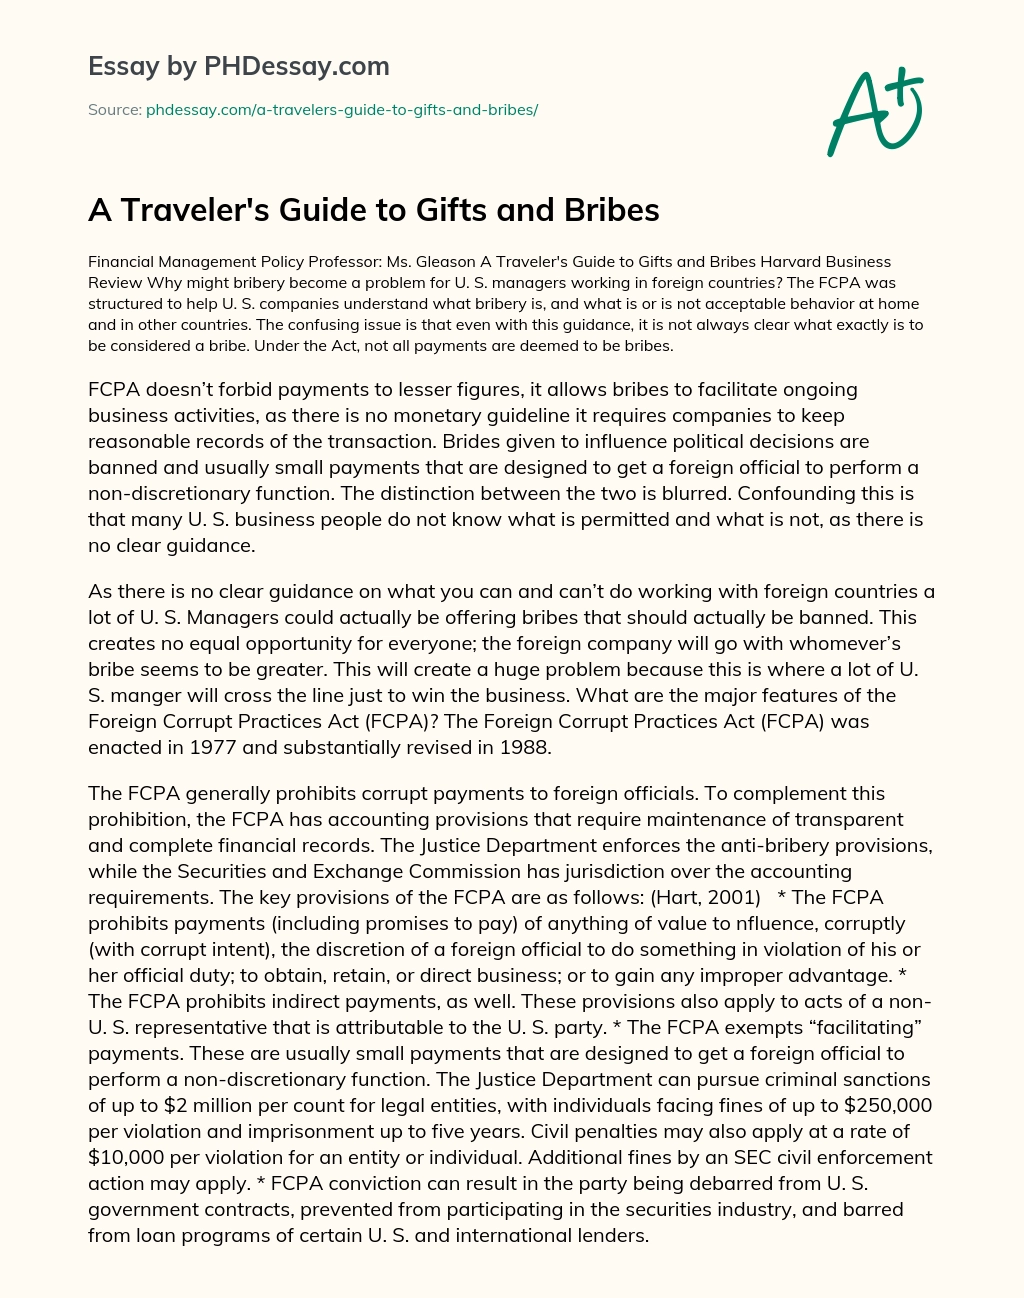 A Traveler’s Guide to Gifts and Bribes essay